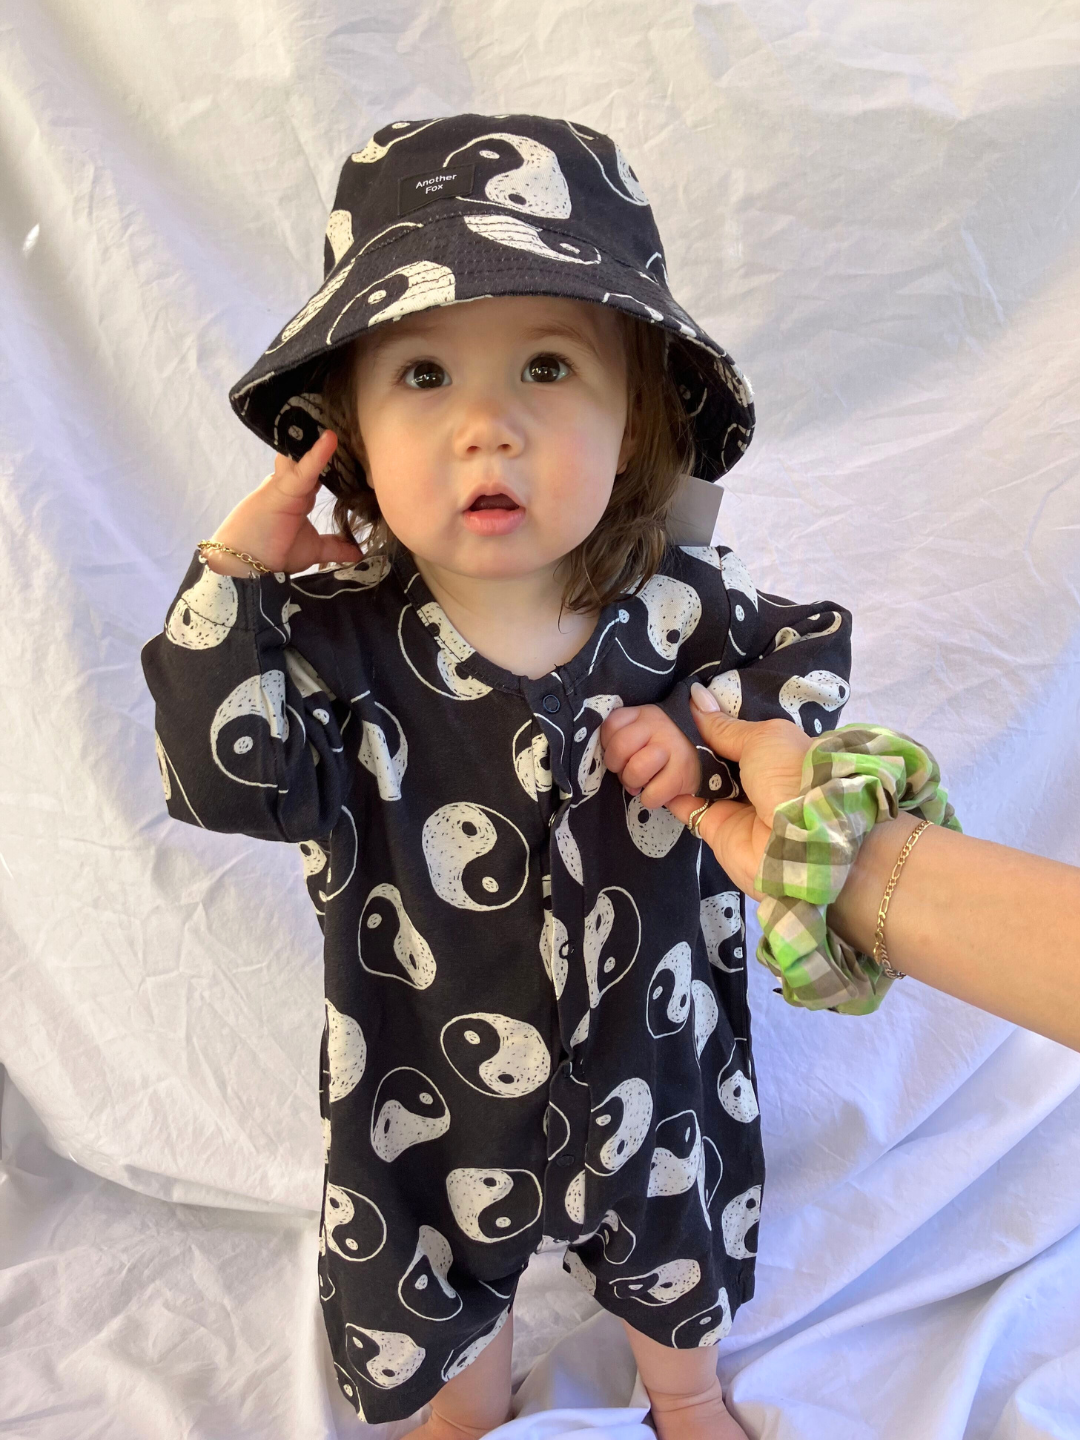 A toddler wearing the yin yang bucket hat with a matching short jumpsuit in black cotton printed all over white white yin yangs. She holds an adults hand with a green plaid scrunchie on the wrist, and is standing on a white sheet backdrop.